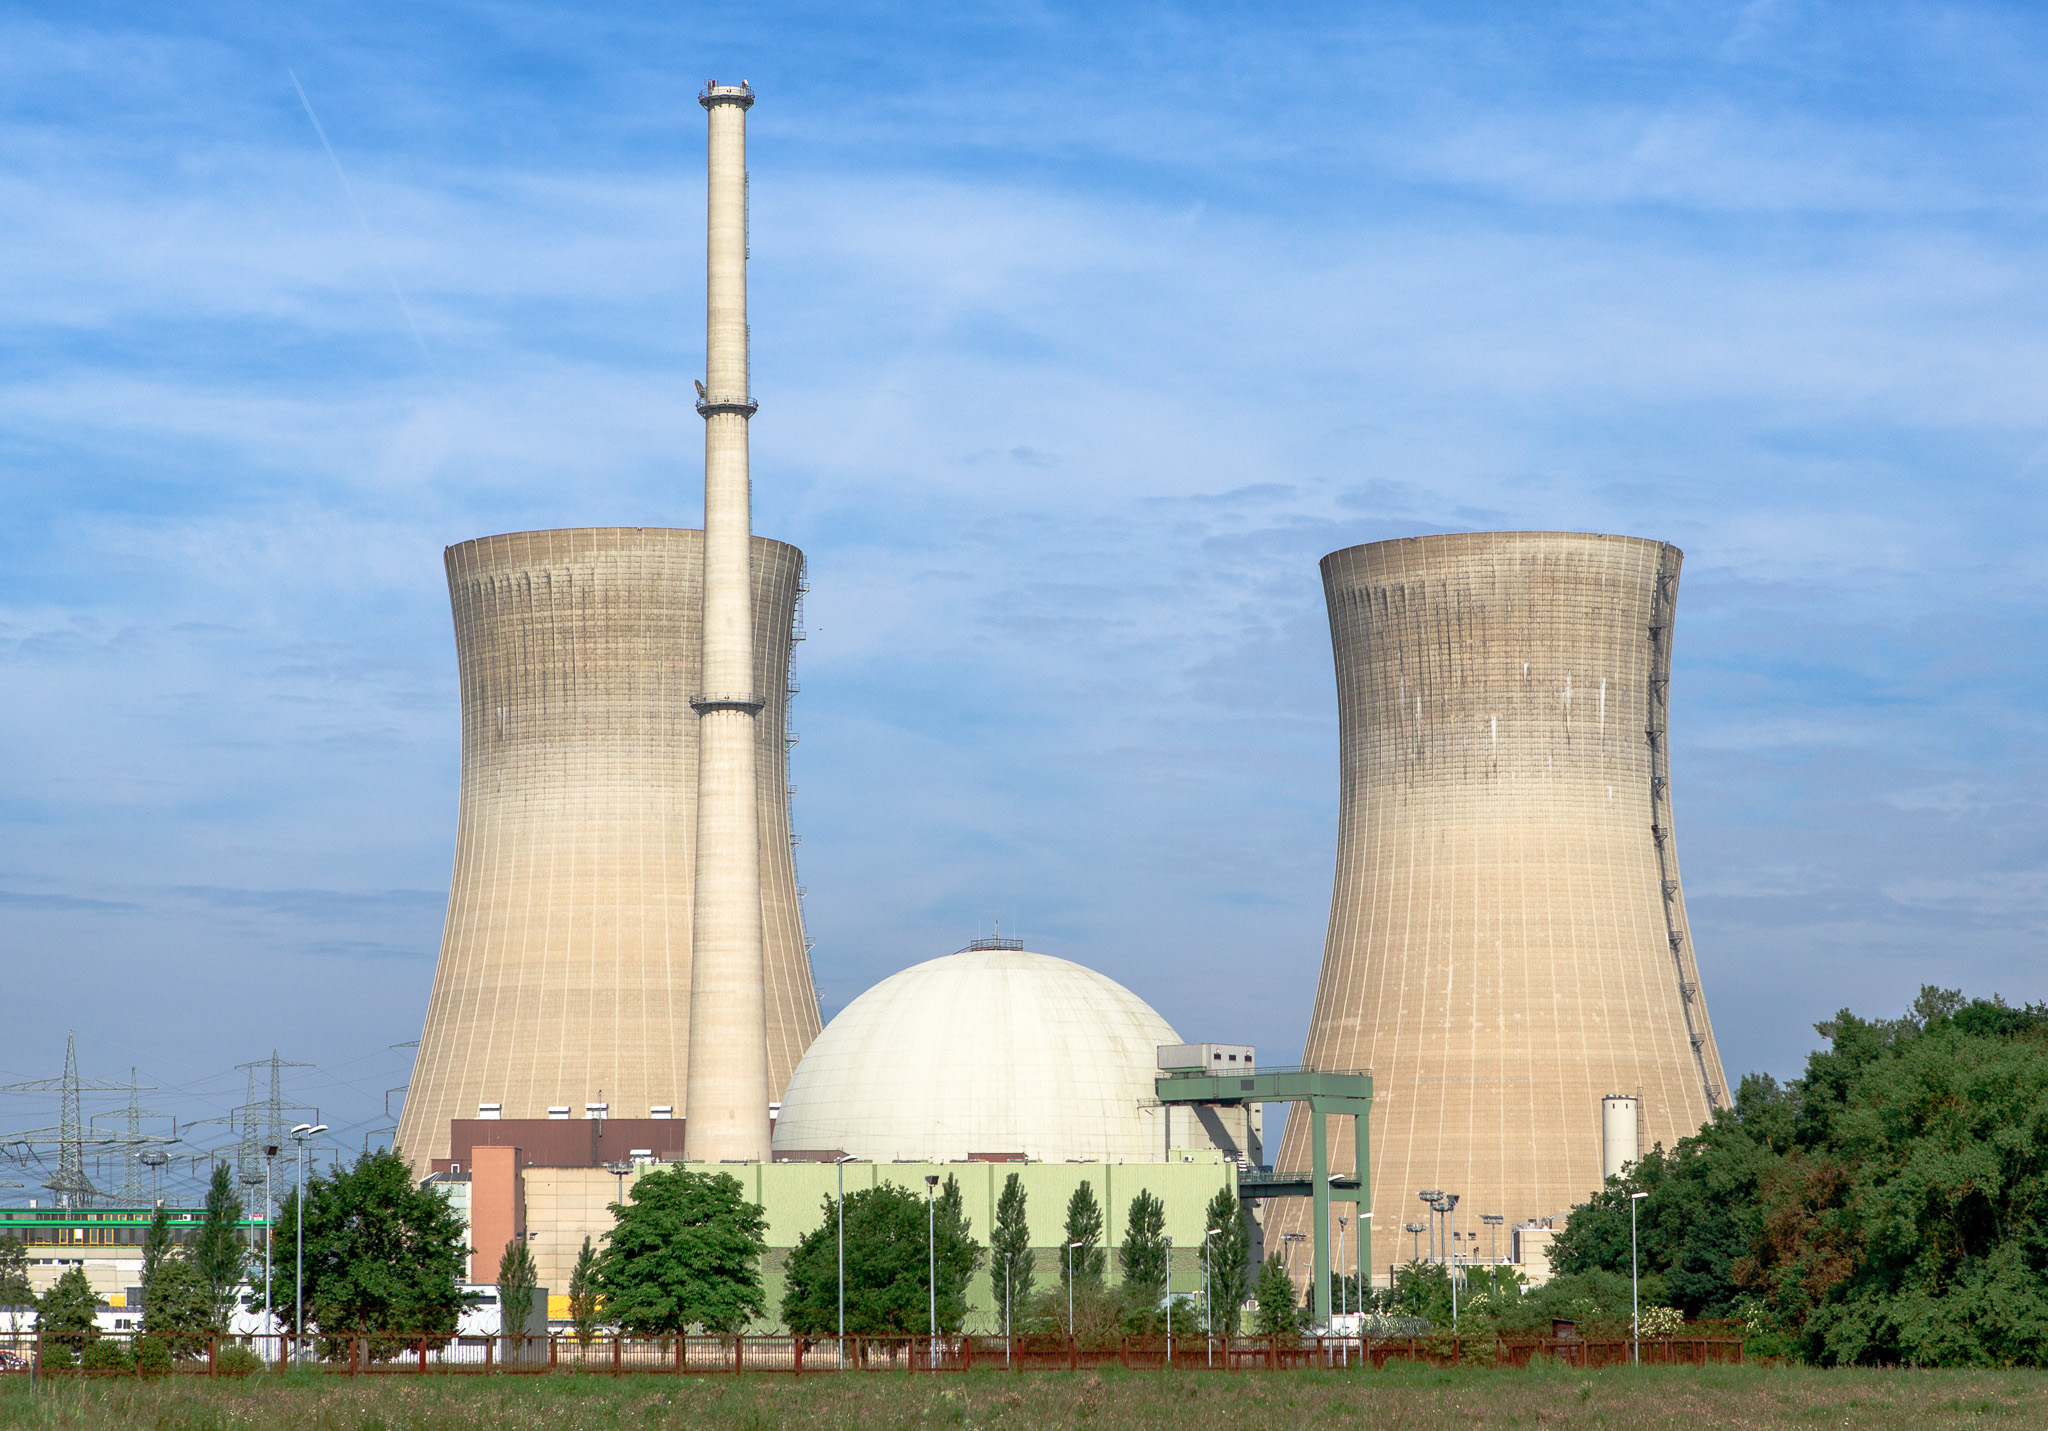 Jaitapur will be the largest nuclear power plant in the country